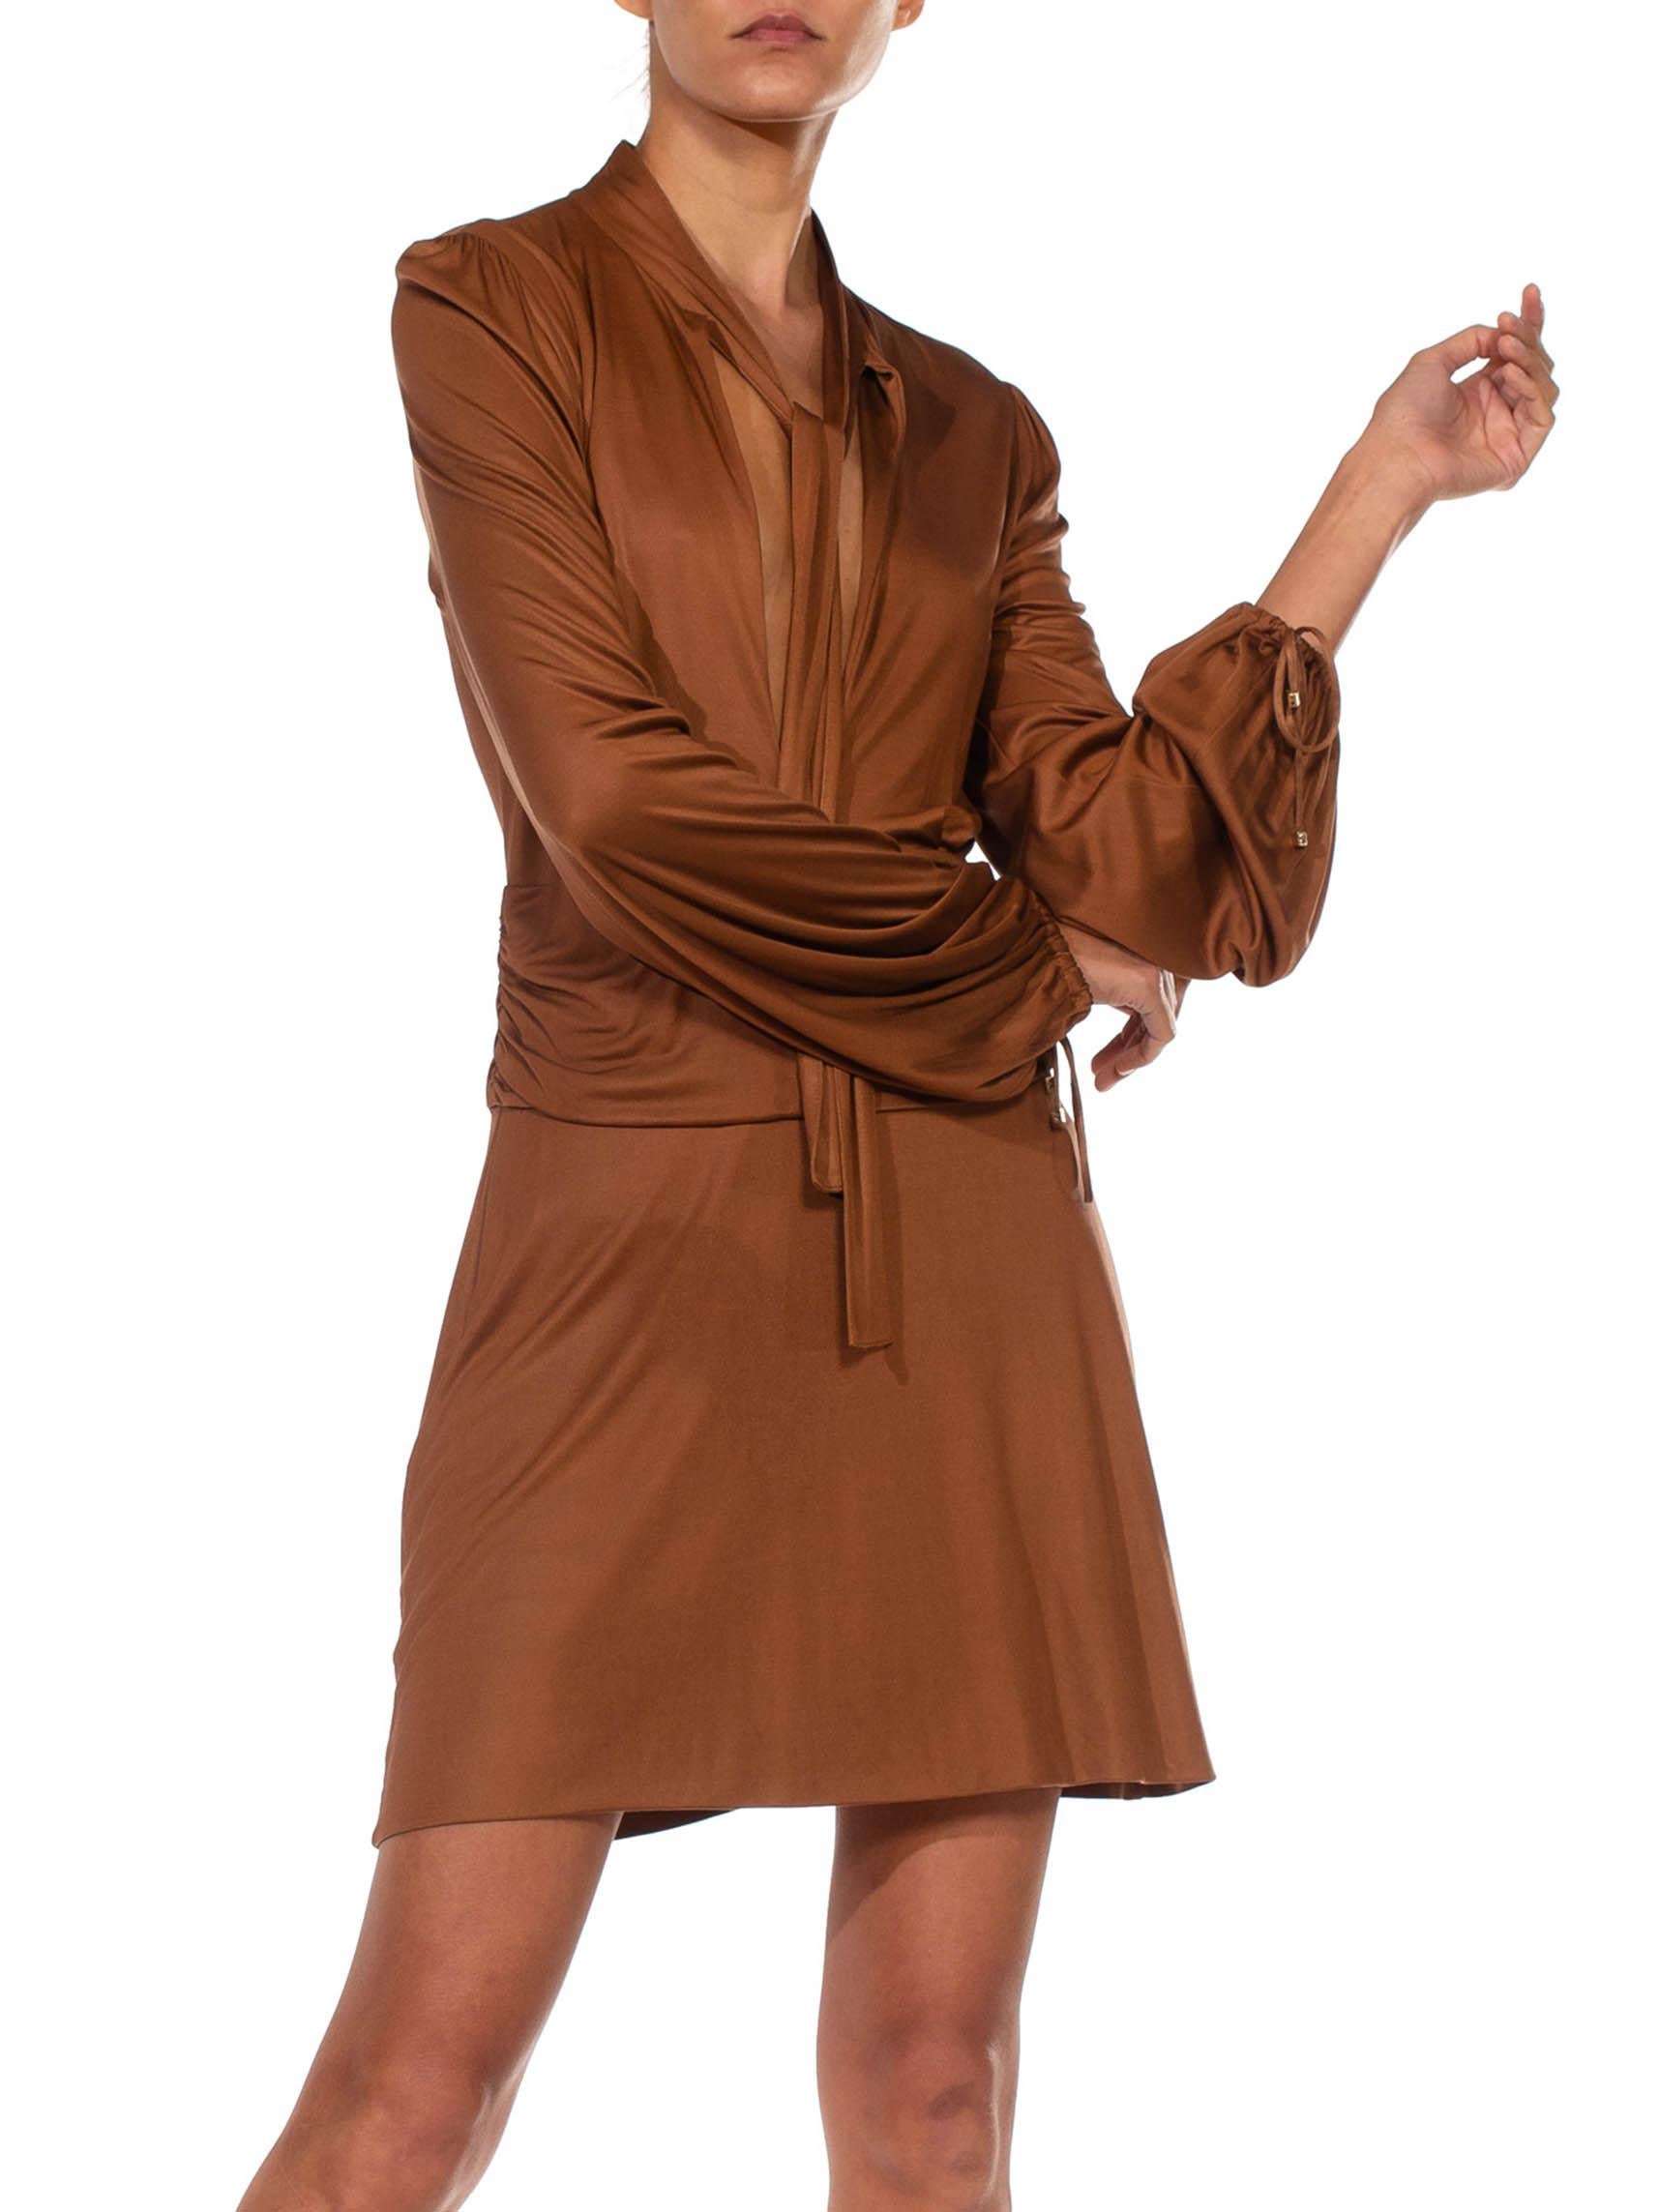 1990S GUCCI Caramel Brown Rayon Jersey Low Cut Mini Cocktail Dress With Sleeves For Sale 4